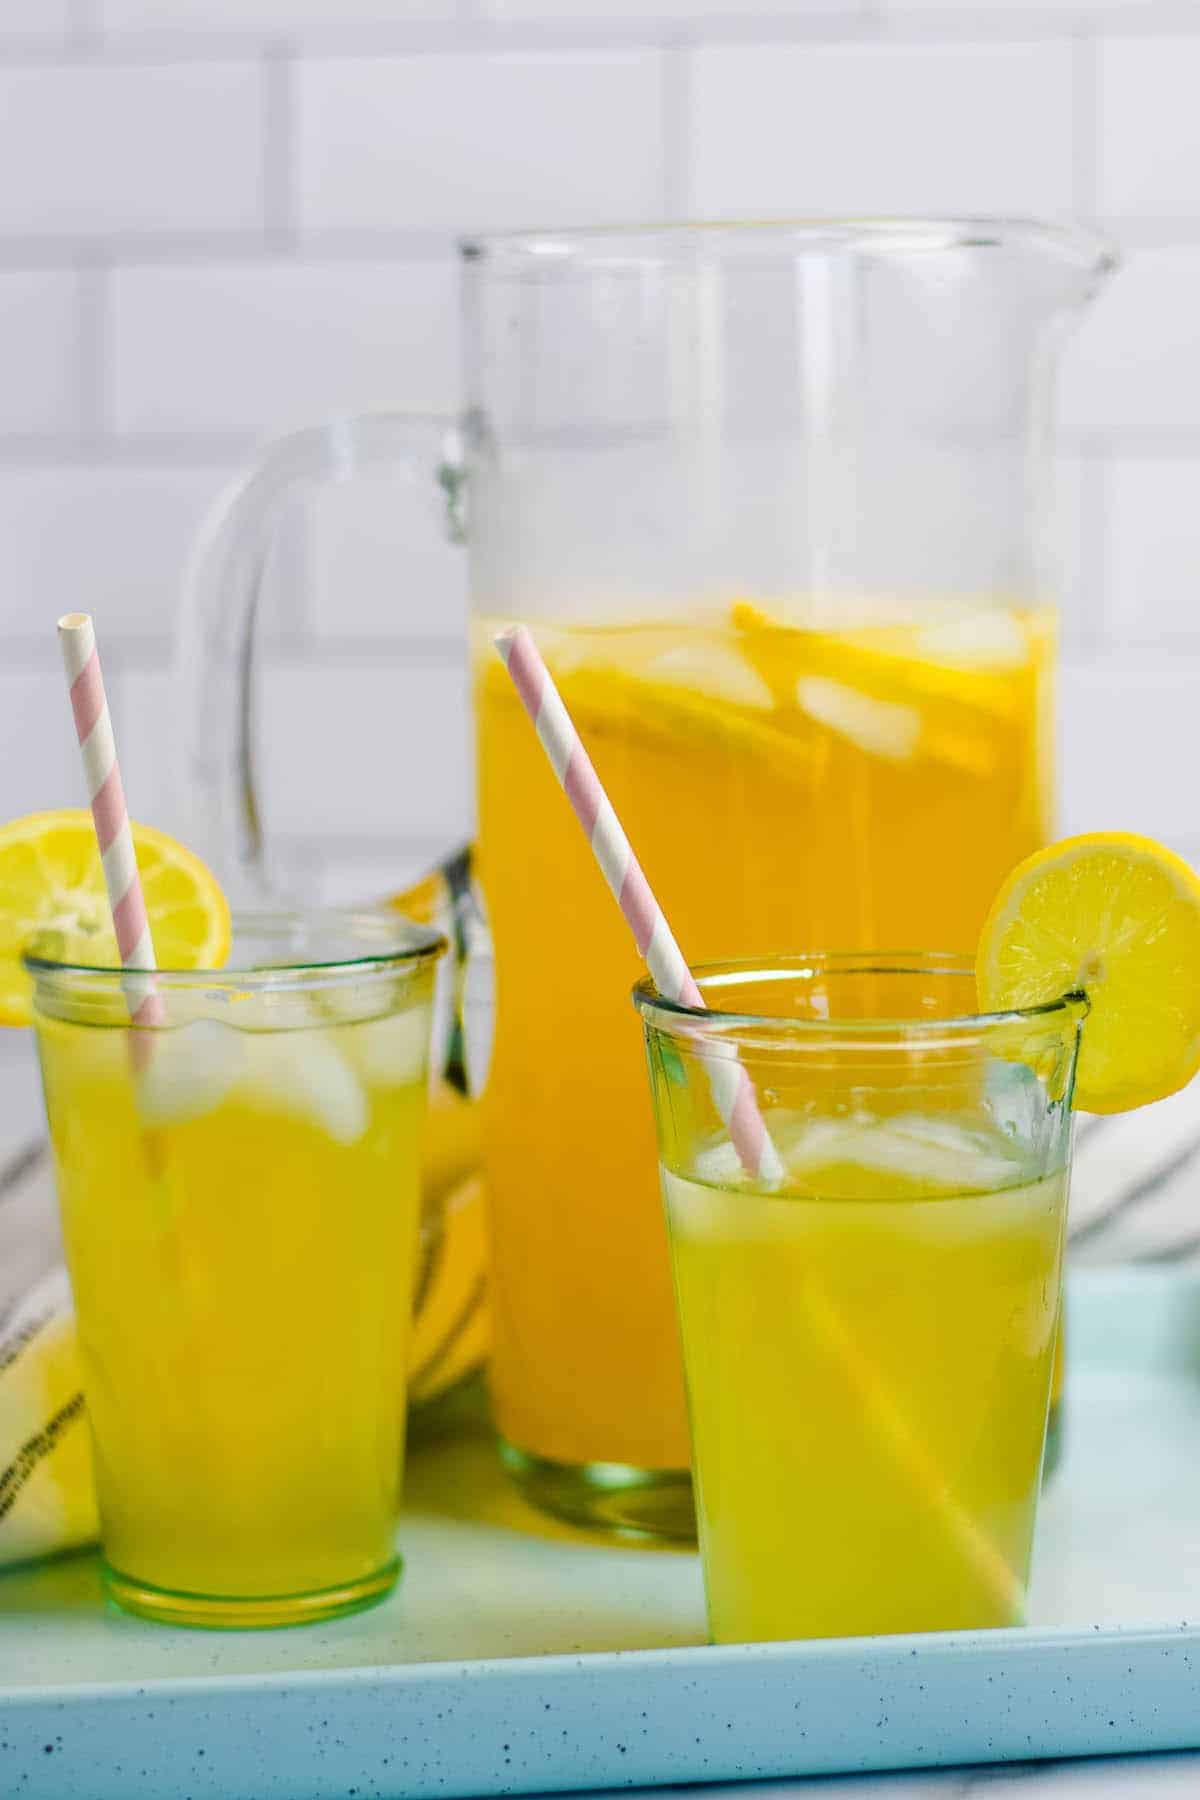 light blue tray with two glasses of healthy lemonade and large pitcher with the lemonade.